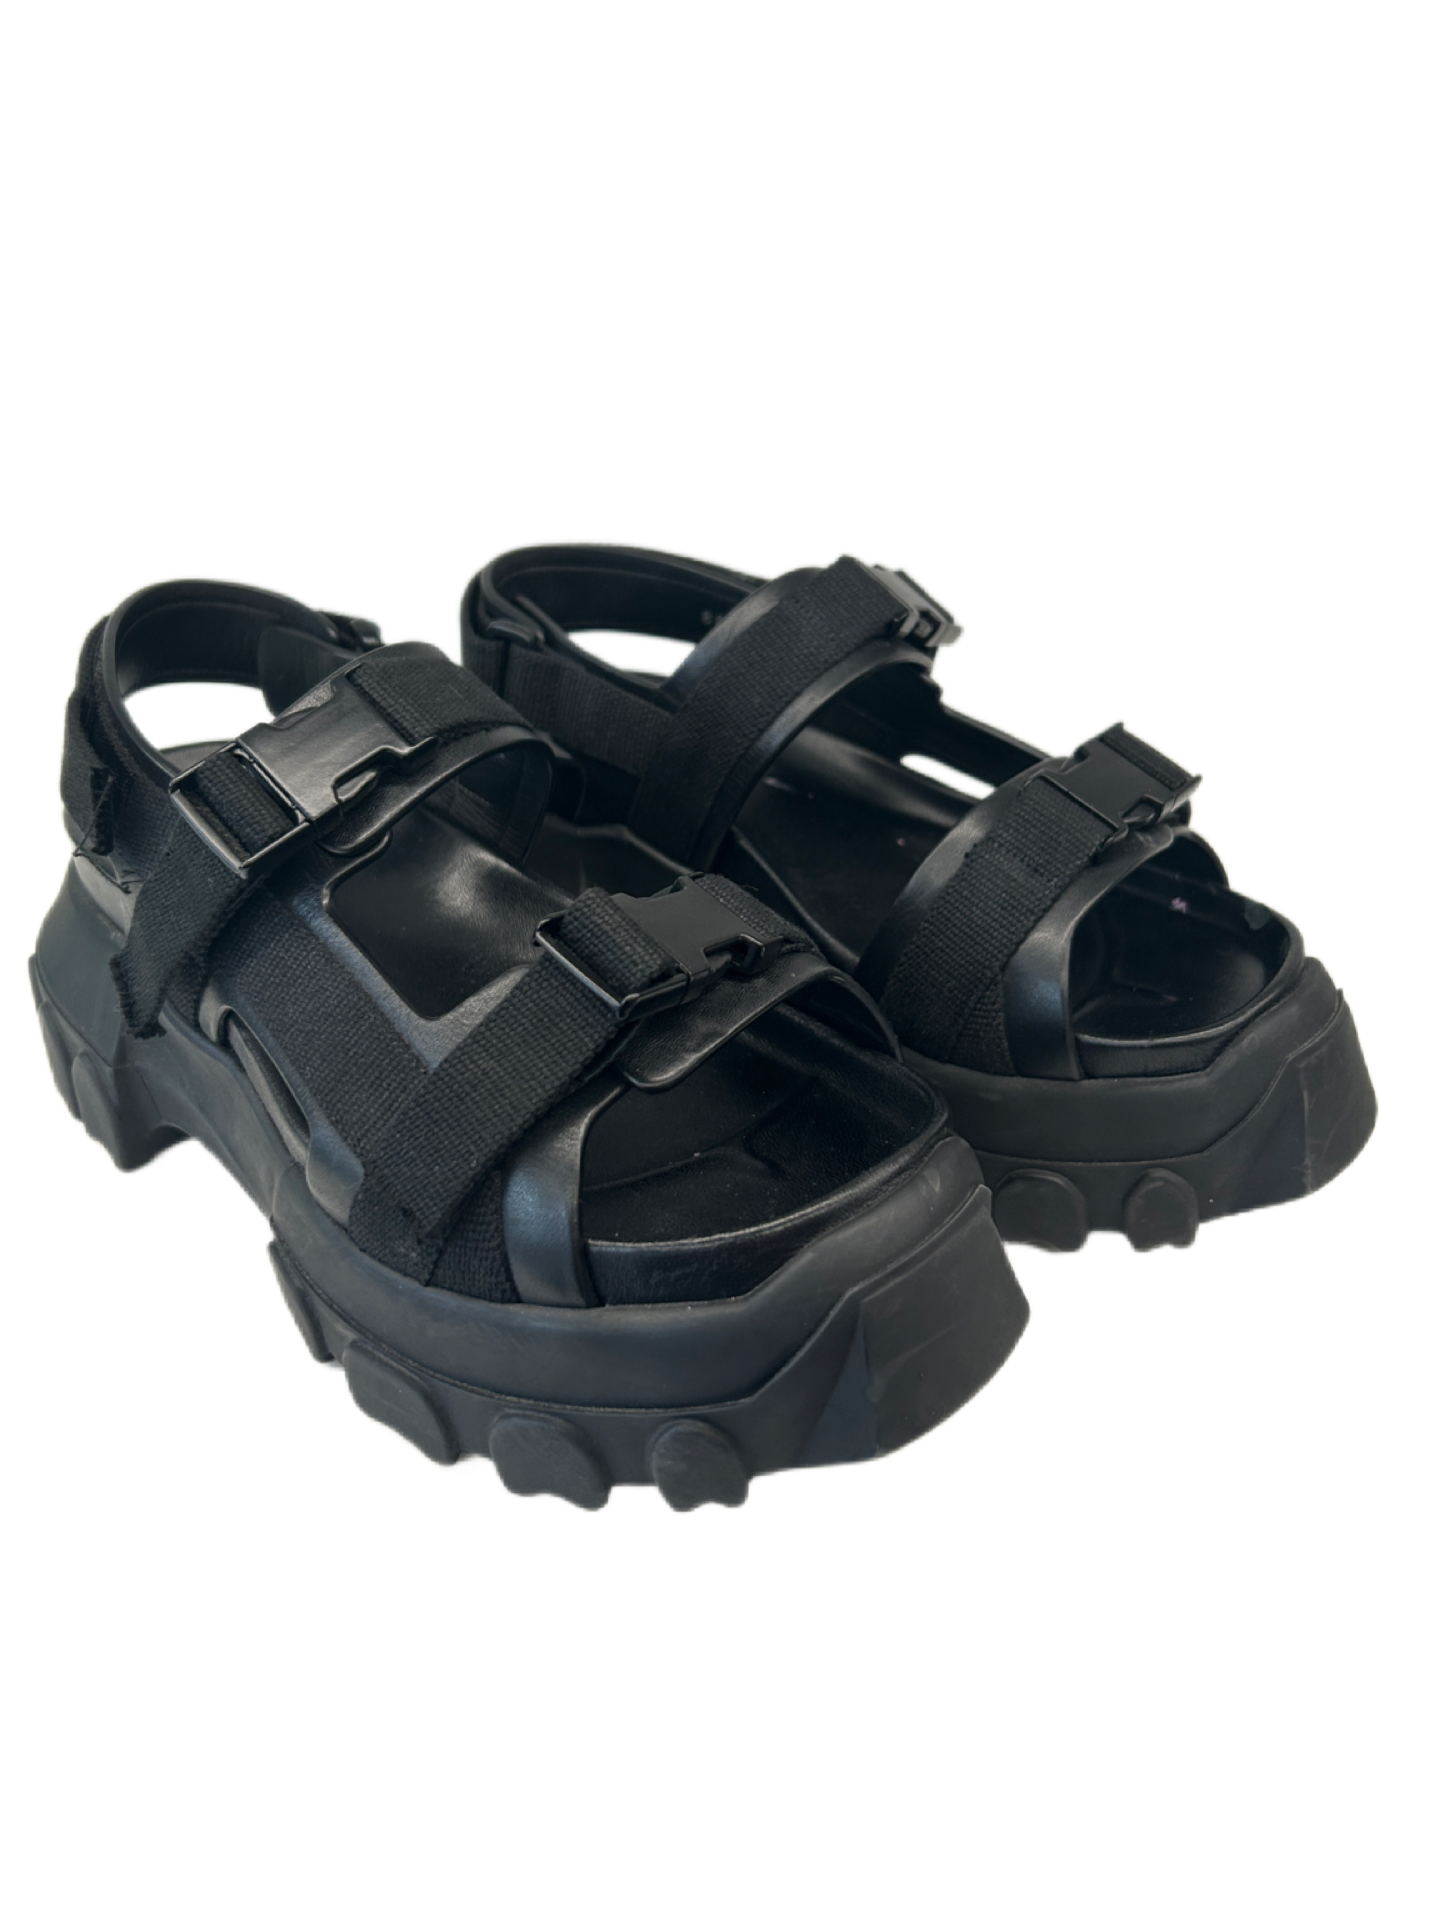 Rick Owens Chunky Black Sandals. Size: 36 (can fit to size 38)